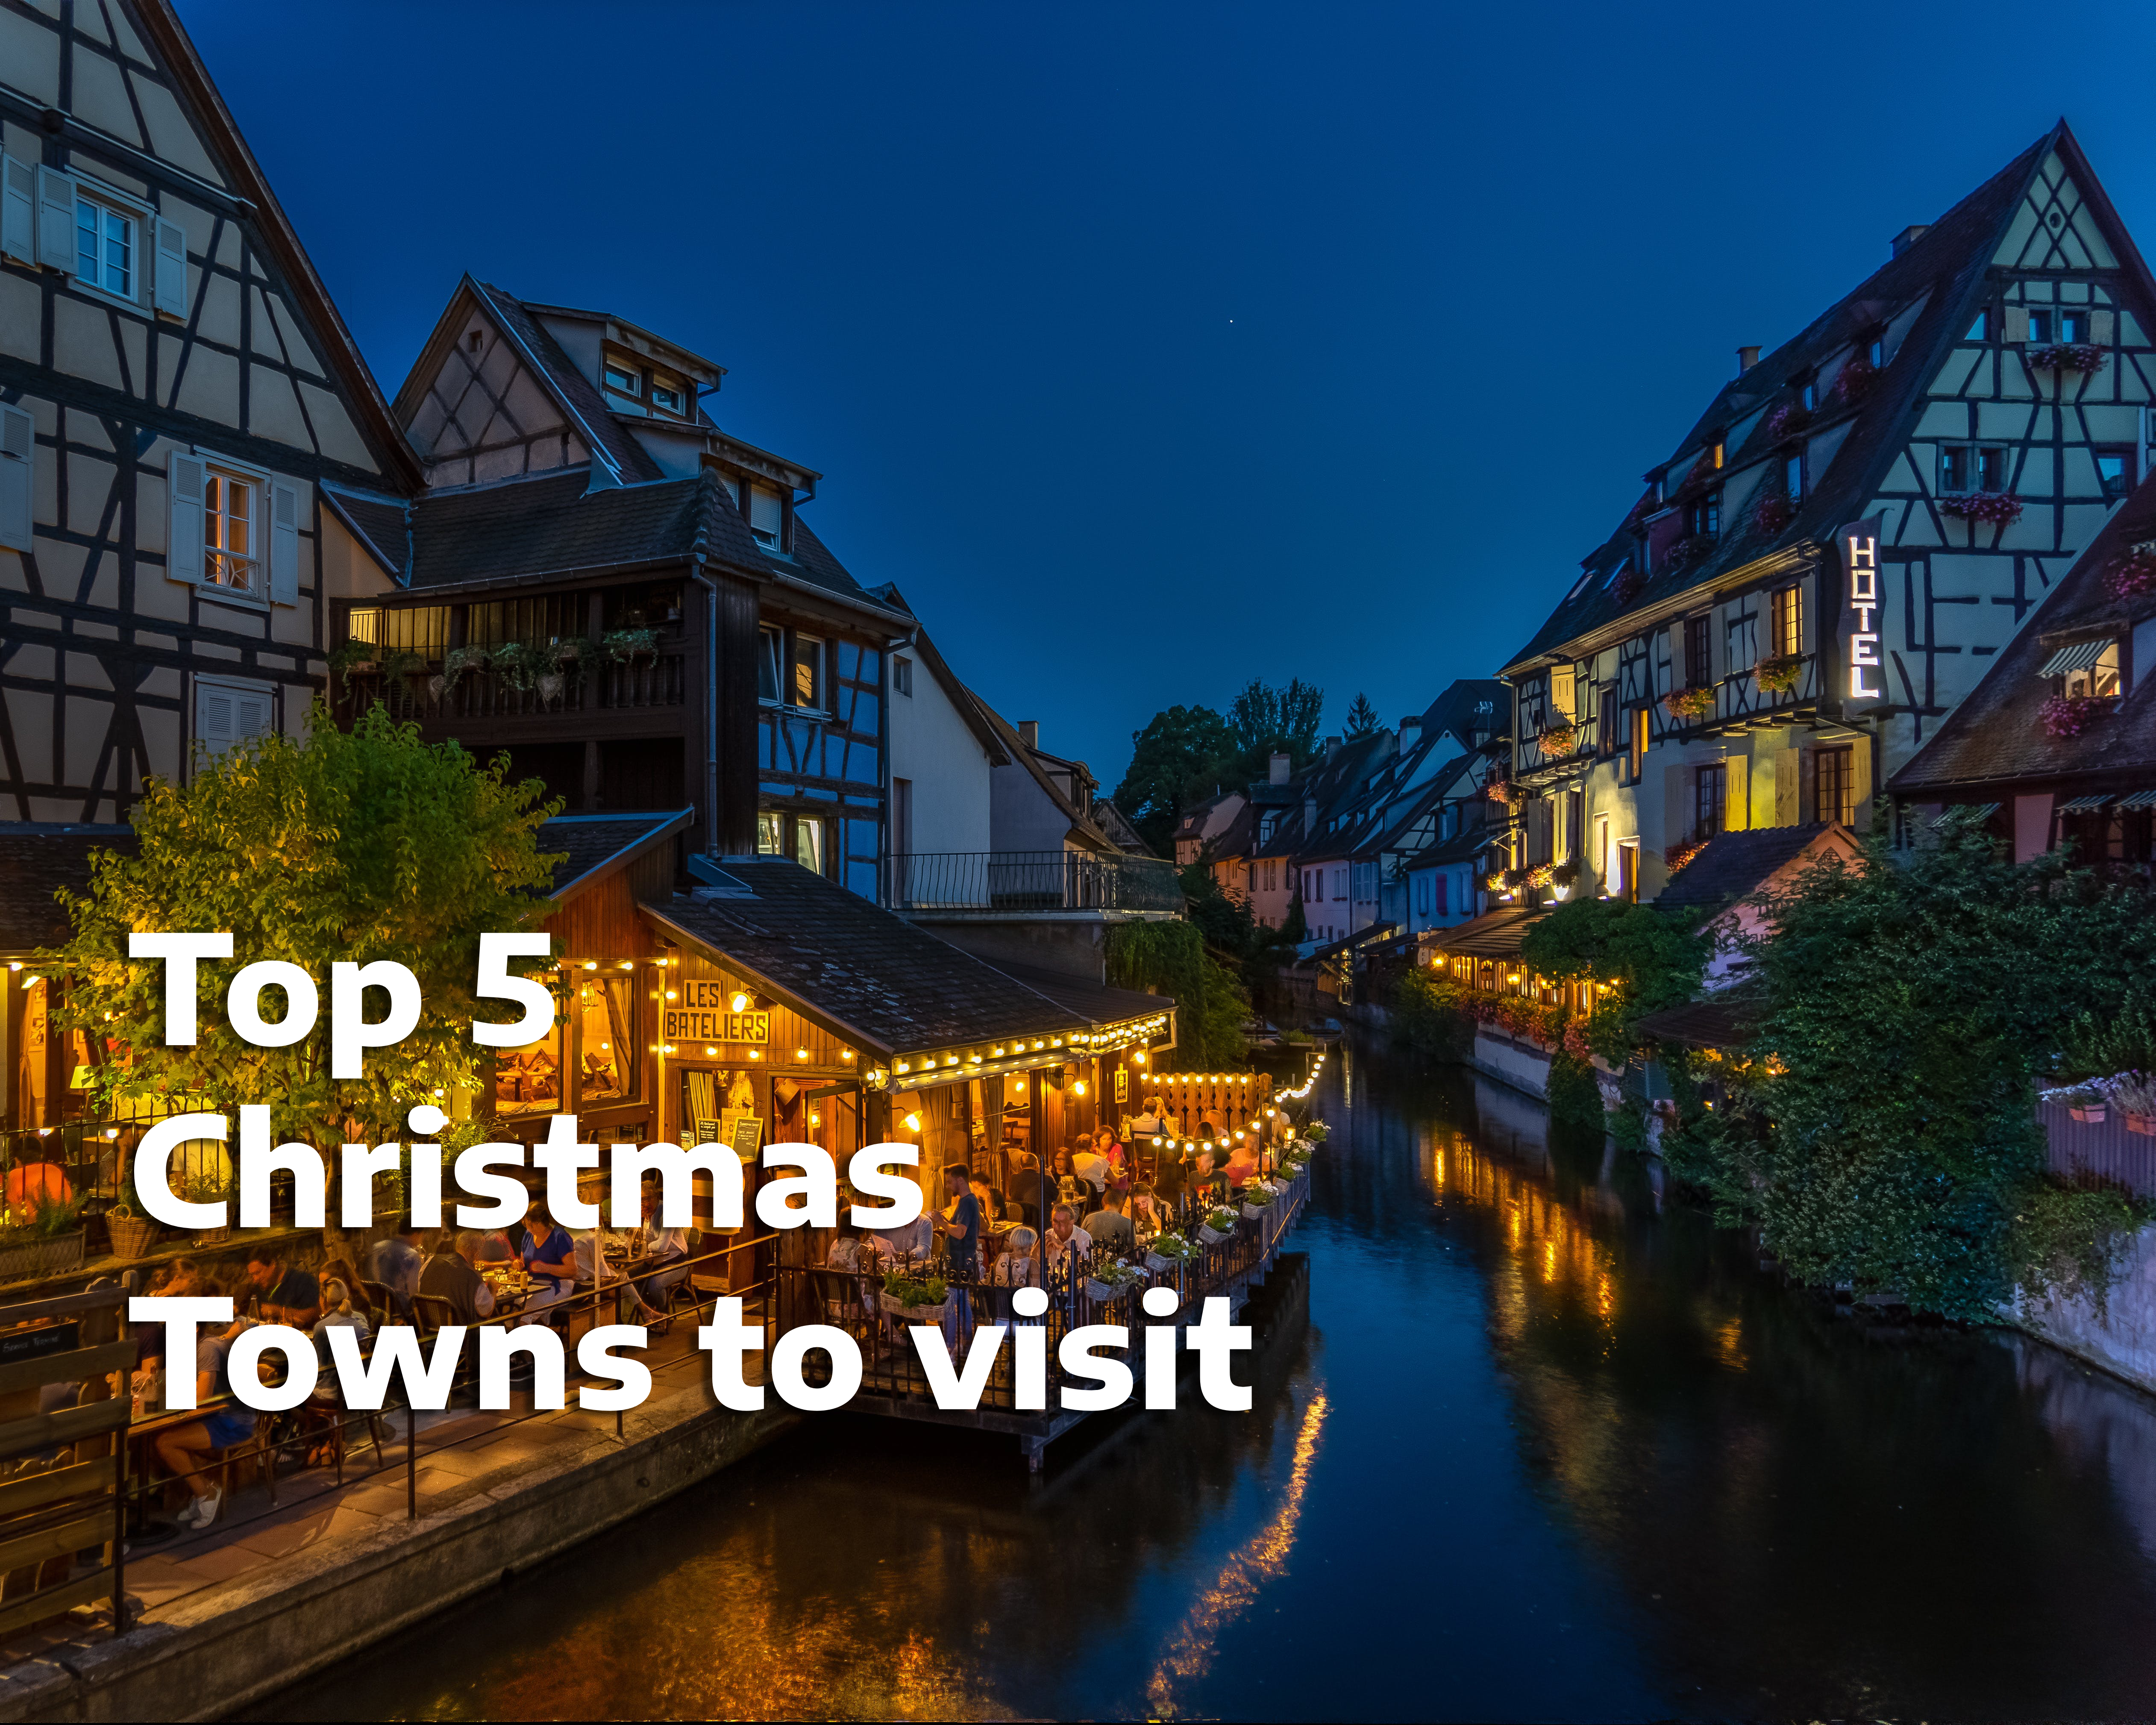 Top 5 Christmas Towns to visit